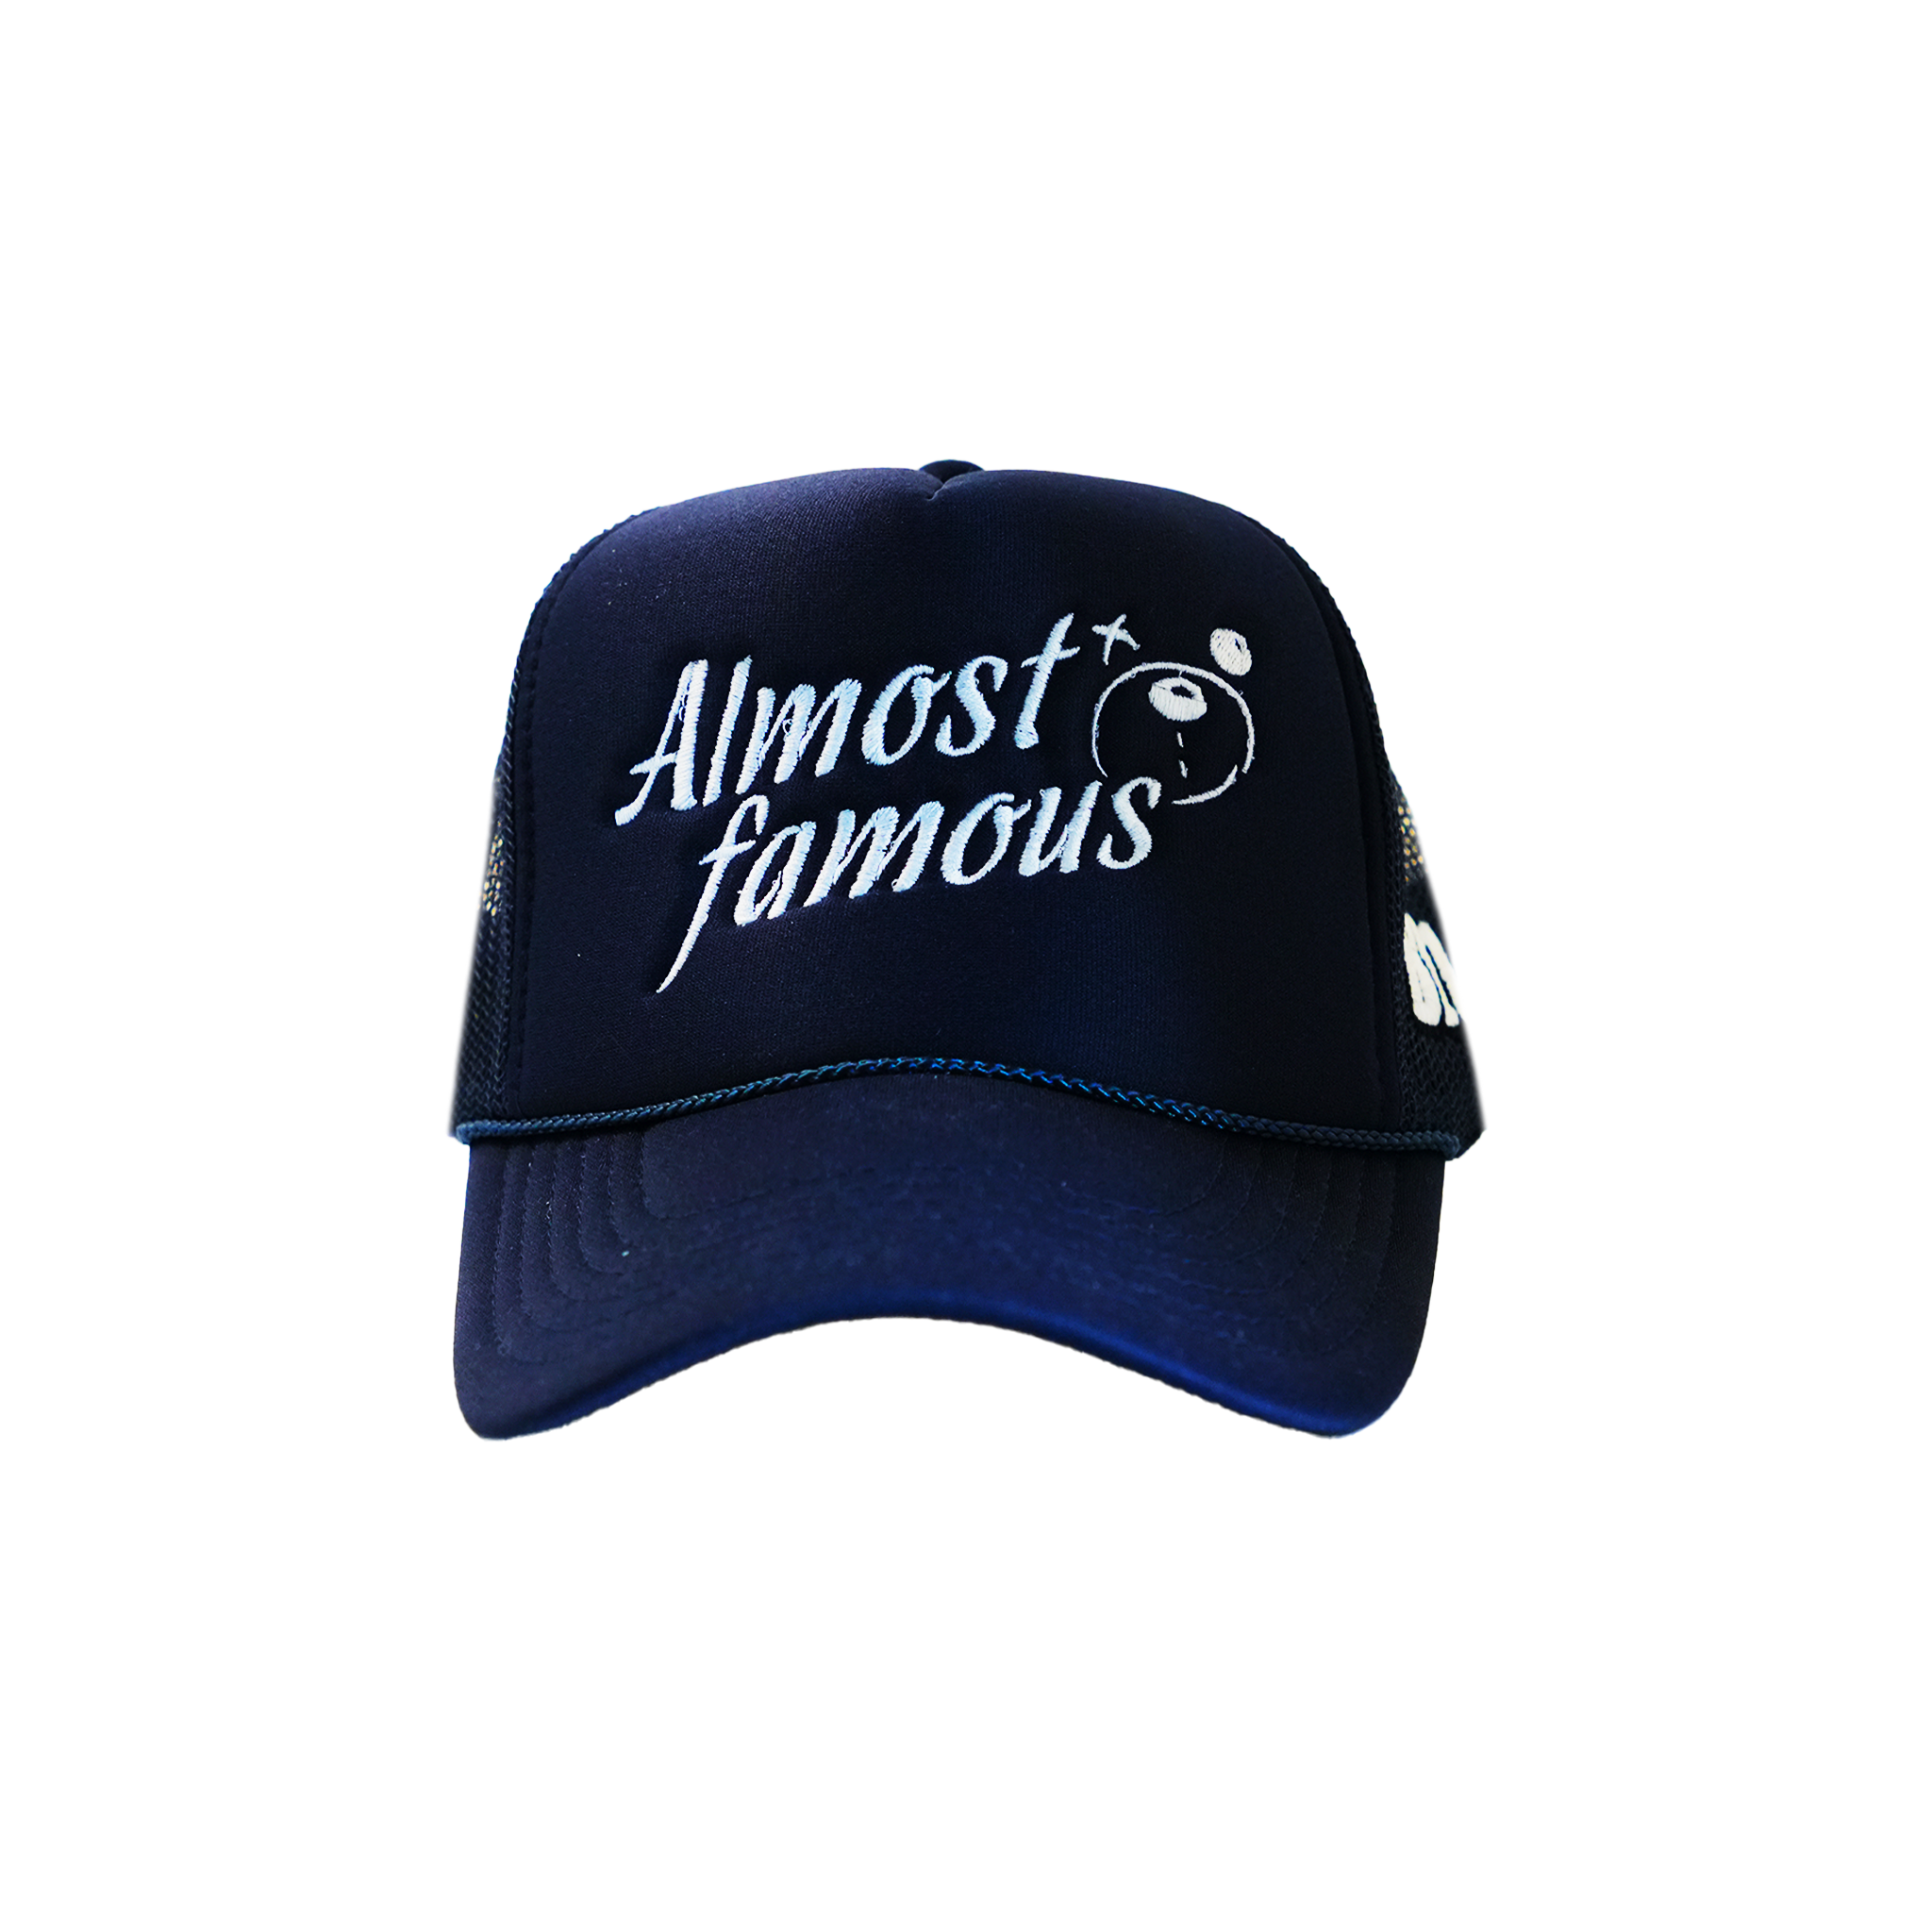 A premium navy blue Almost Famous Trucker baseball cap by Better not with the phrase "almost famous" embroidered in white, accompanied by a small graphic of a smiling face with sunglasses.